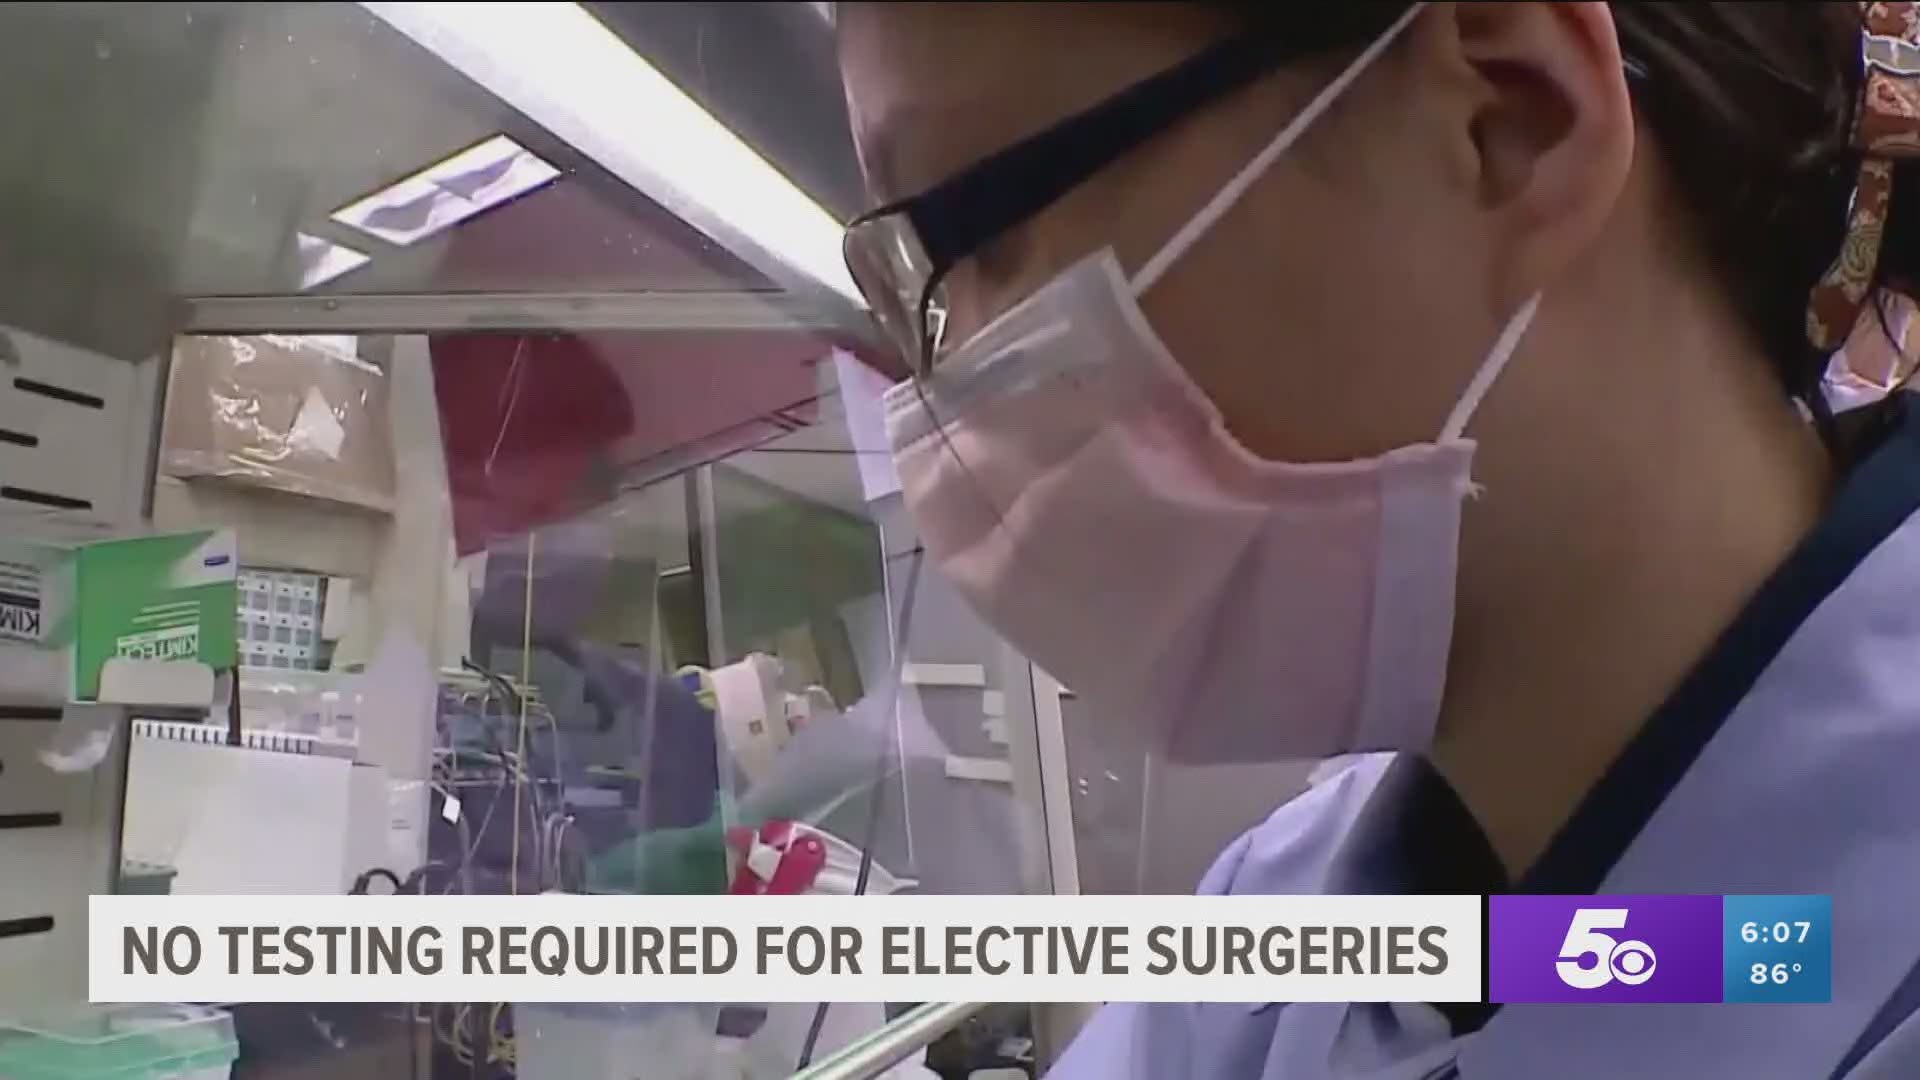 The state will leave the decision up to physicians and institutions if they will test patients for COVID-19 before elective surgeries. https://bit.ly/2D5tRVd